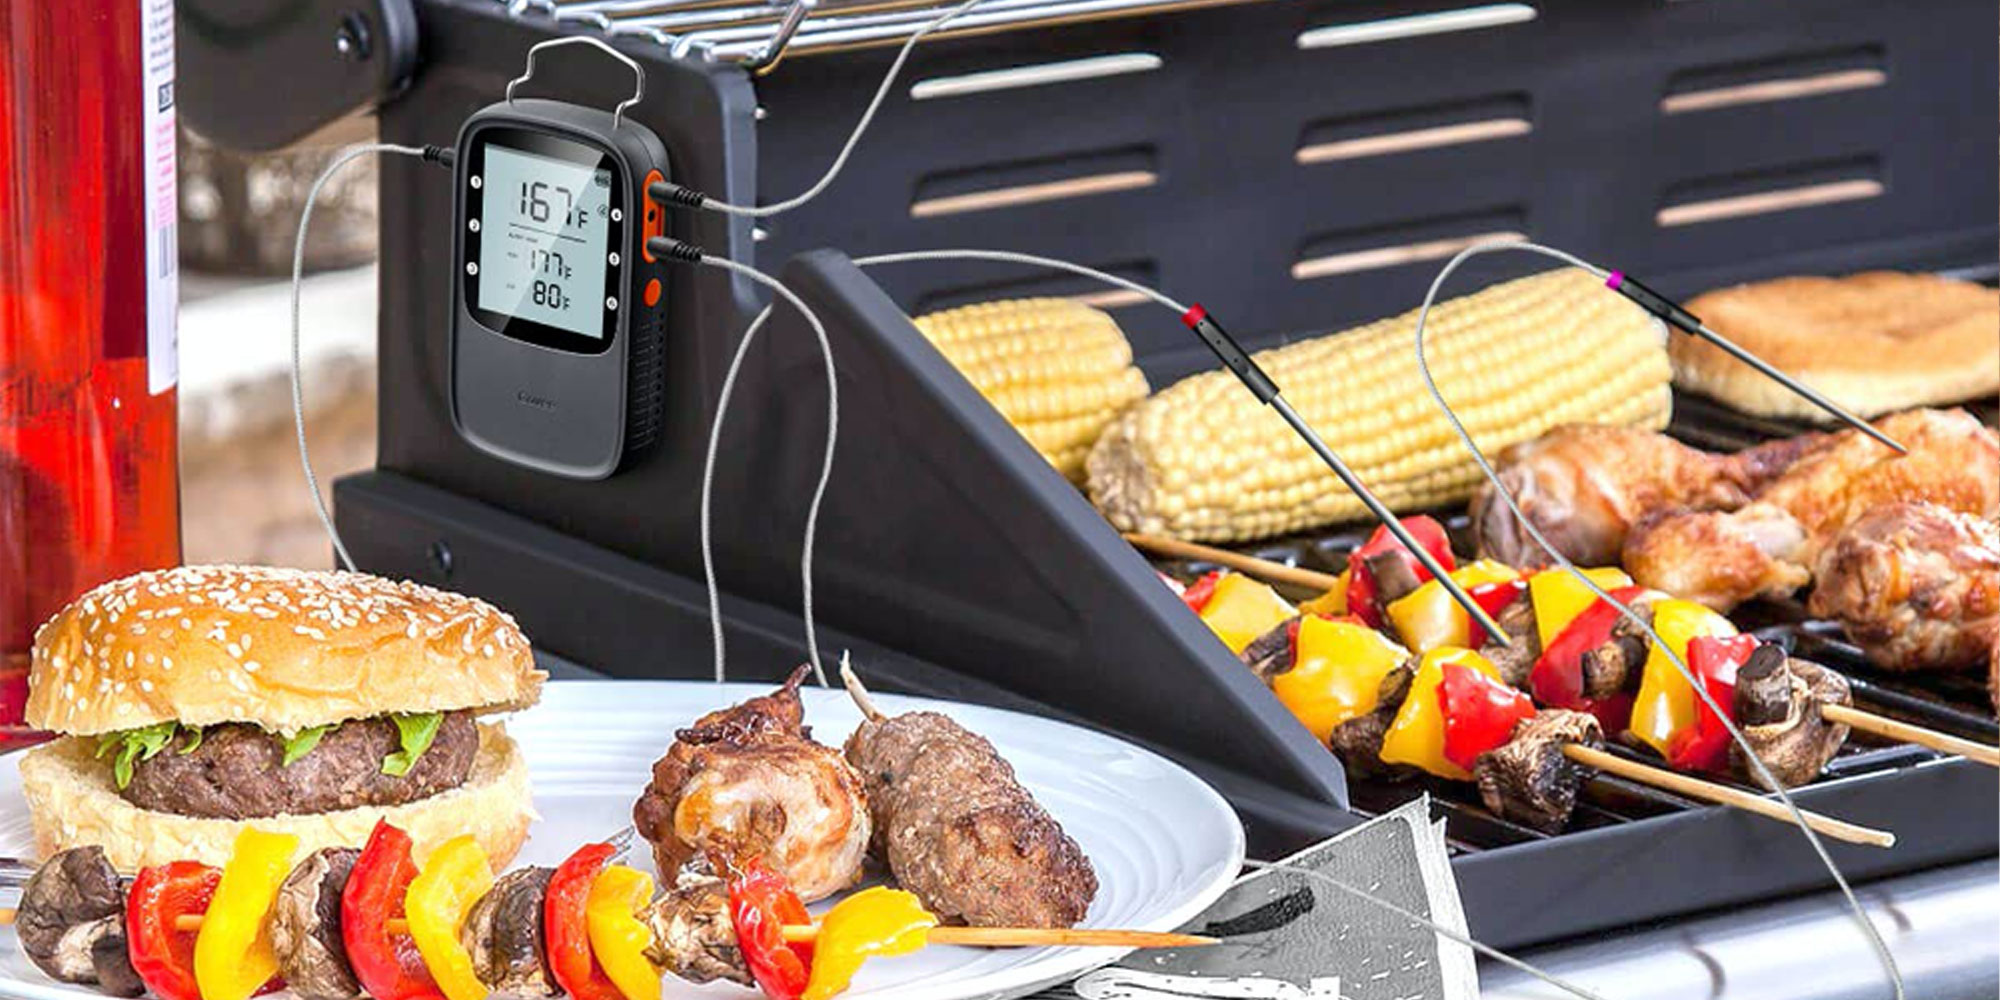 https://9to5toys.com/wp-content/uploads/sites/5/2019/10/govee-digital-meat-thermometer.jpg